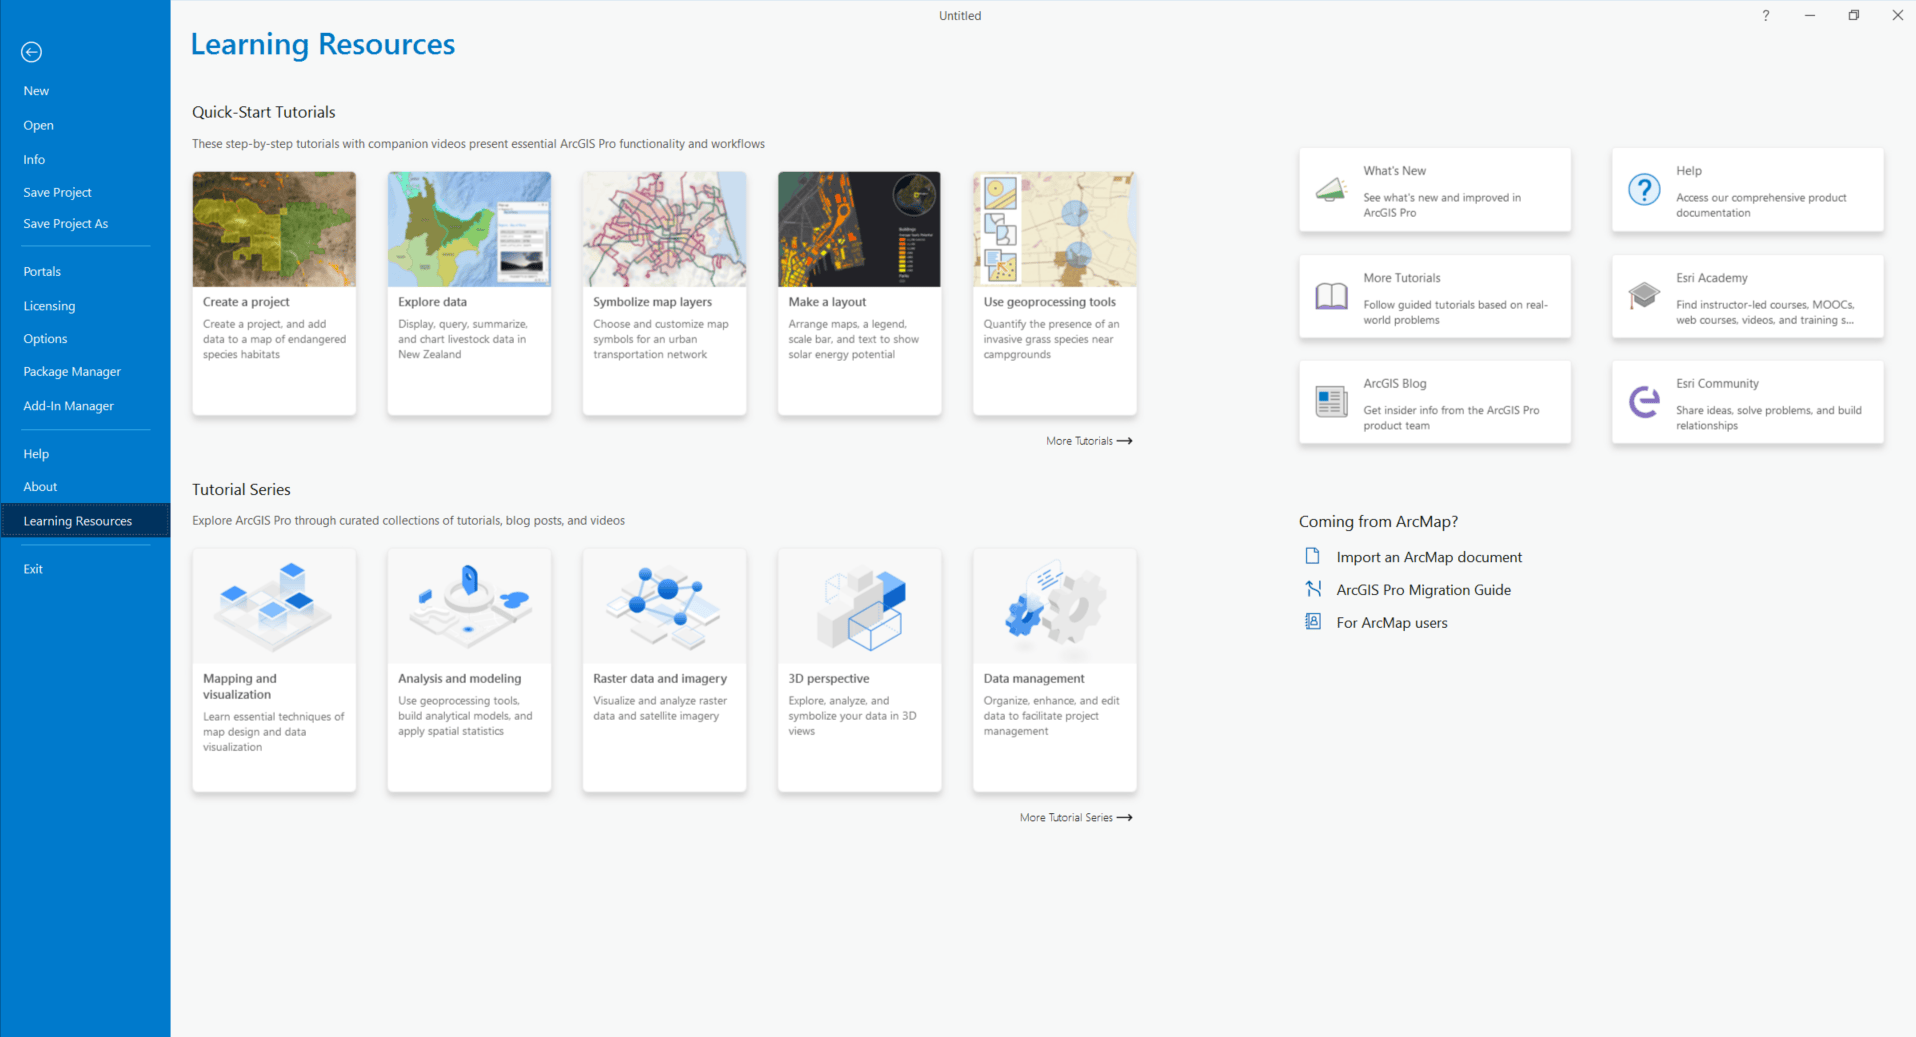 Learning Resources page in ArcGIS Pro includes a Coming from ArcMap? Section plus so much more for continued learning.